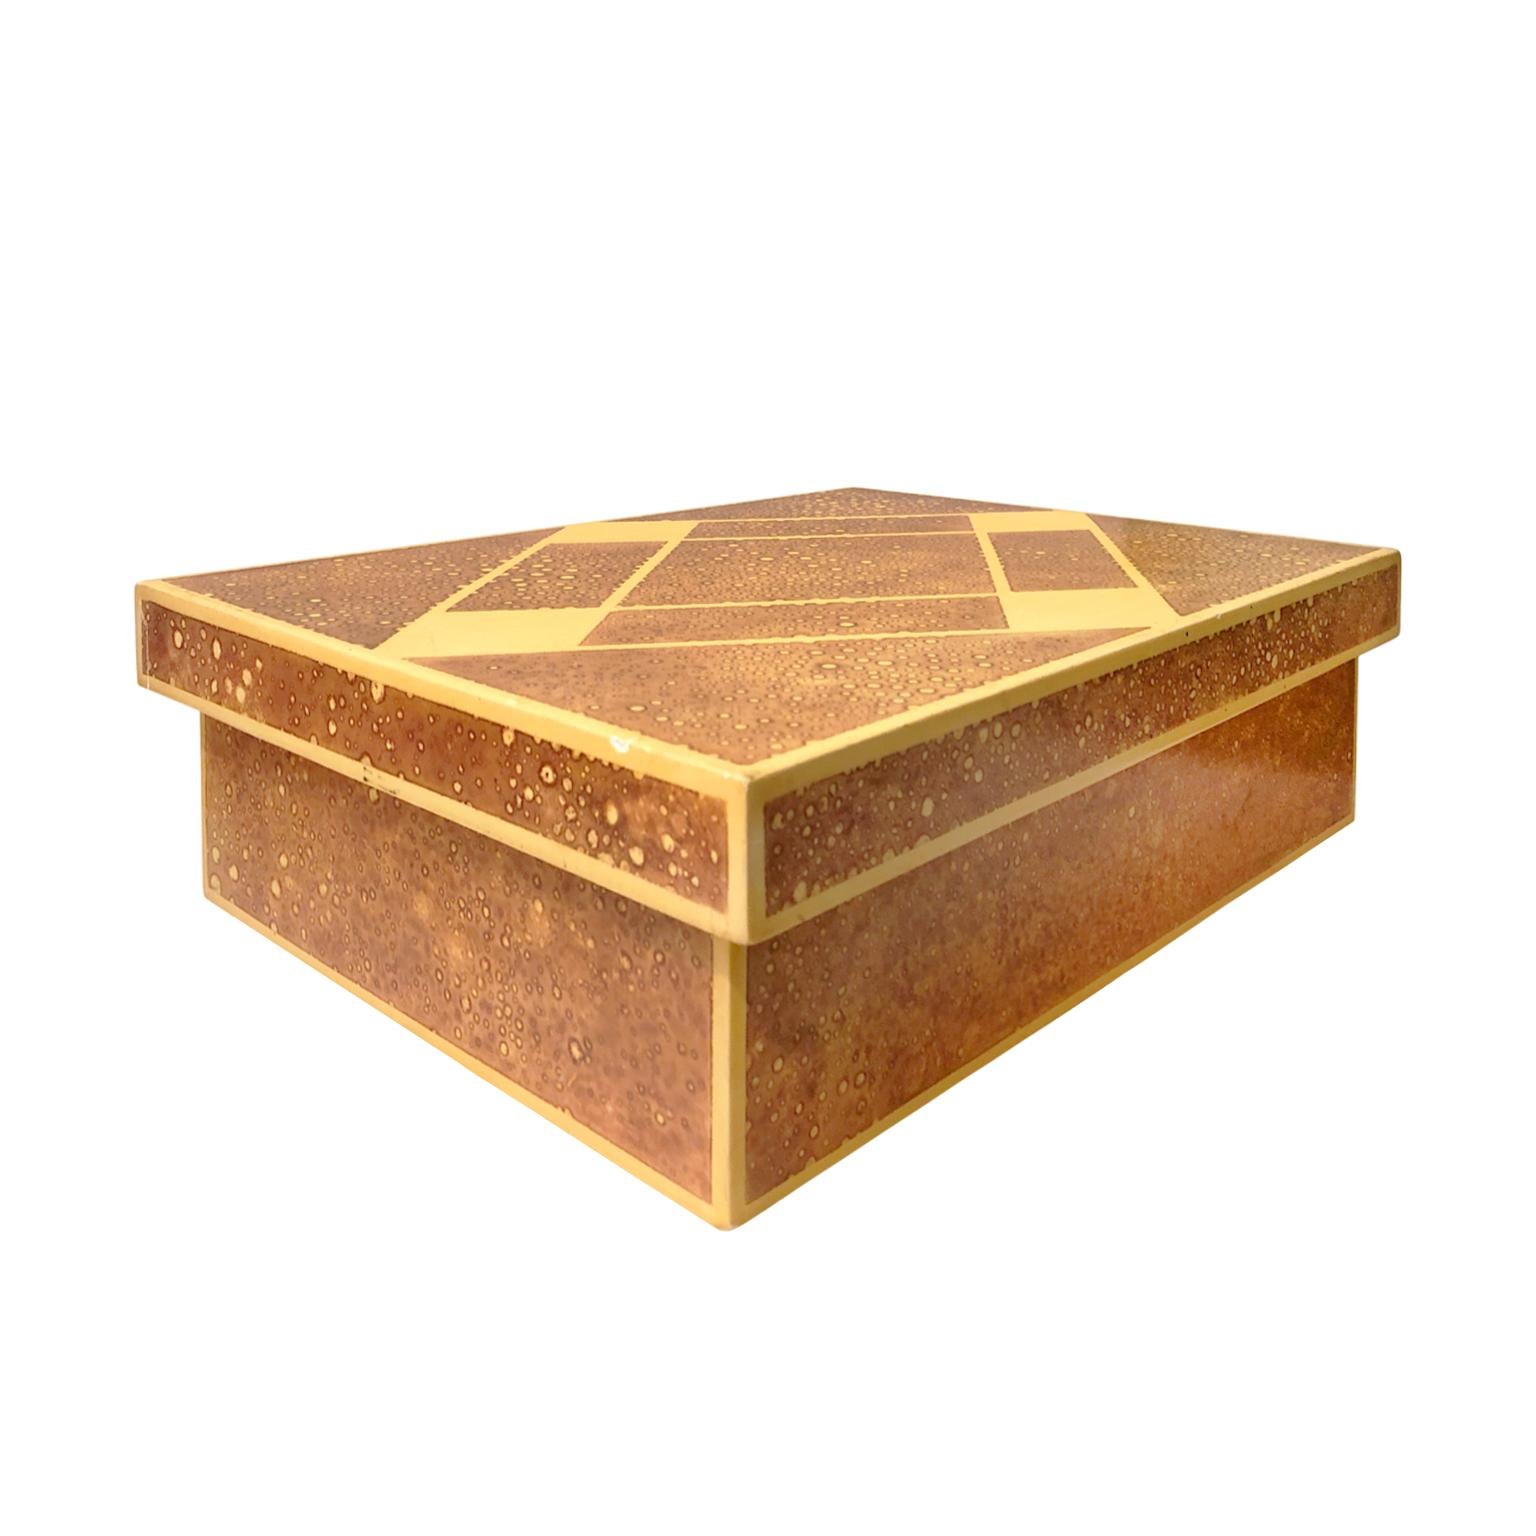 American 1970s Rectangular Lacquered Box with Diamond Patterned Lid For Sale